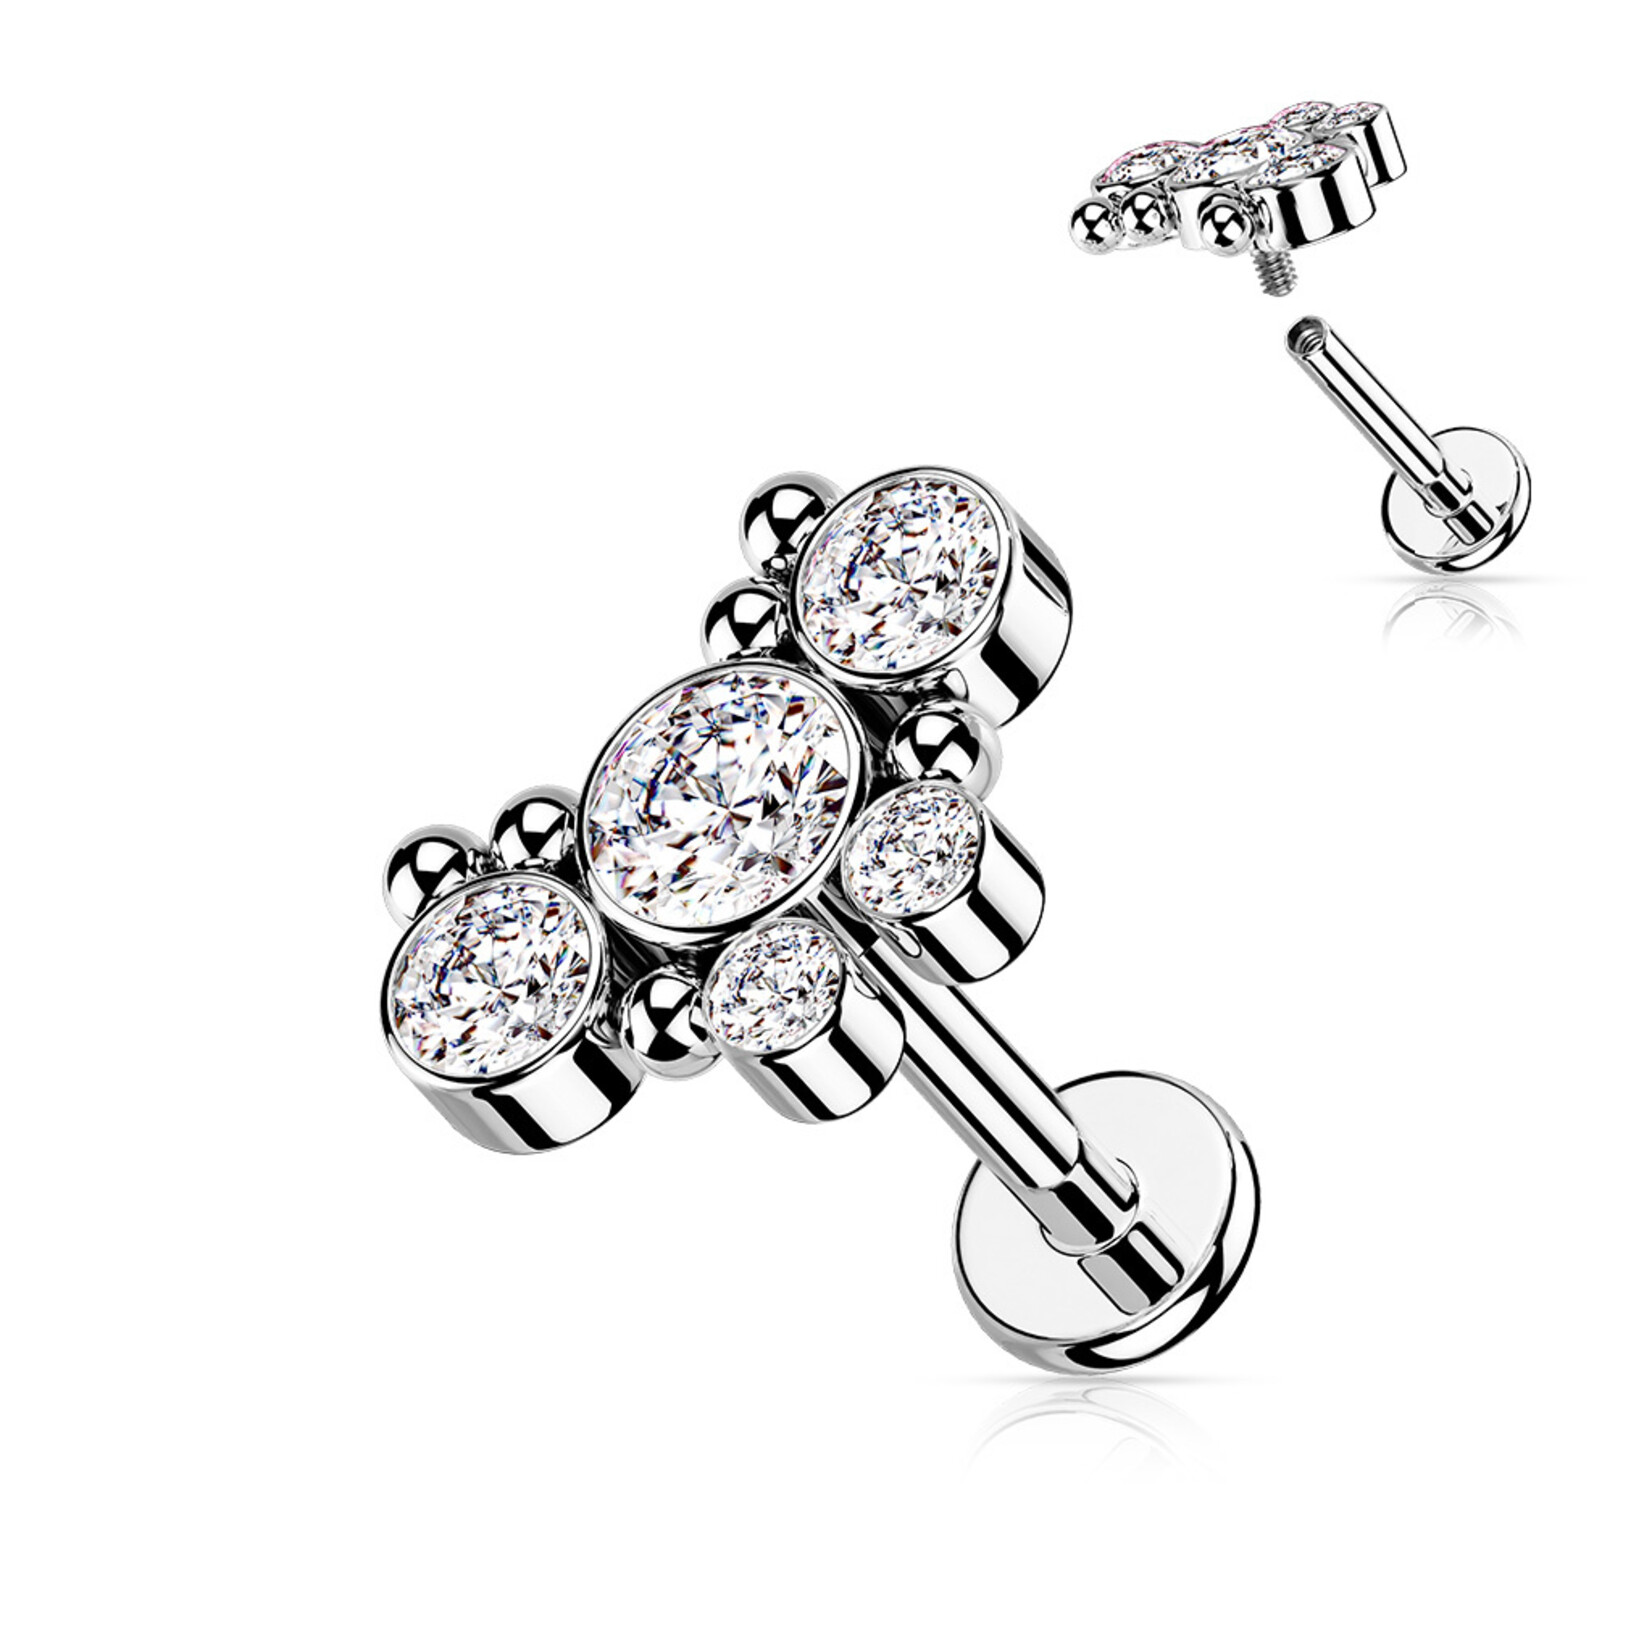 Hollywood Body Jewelry 5 Crystal Butterfly Labret